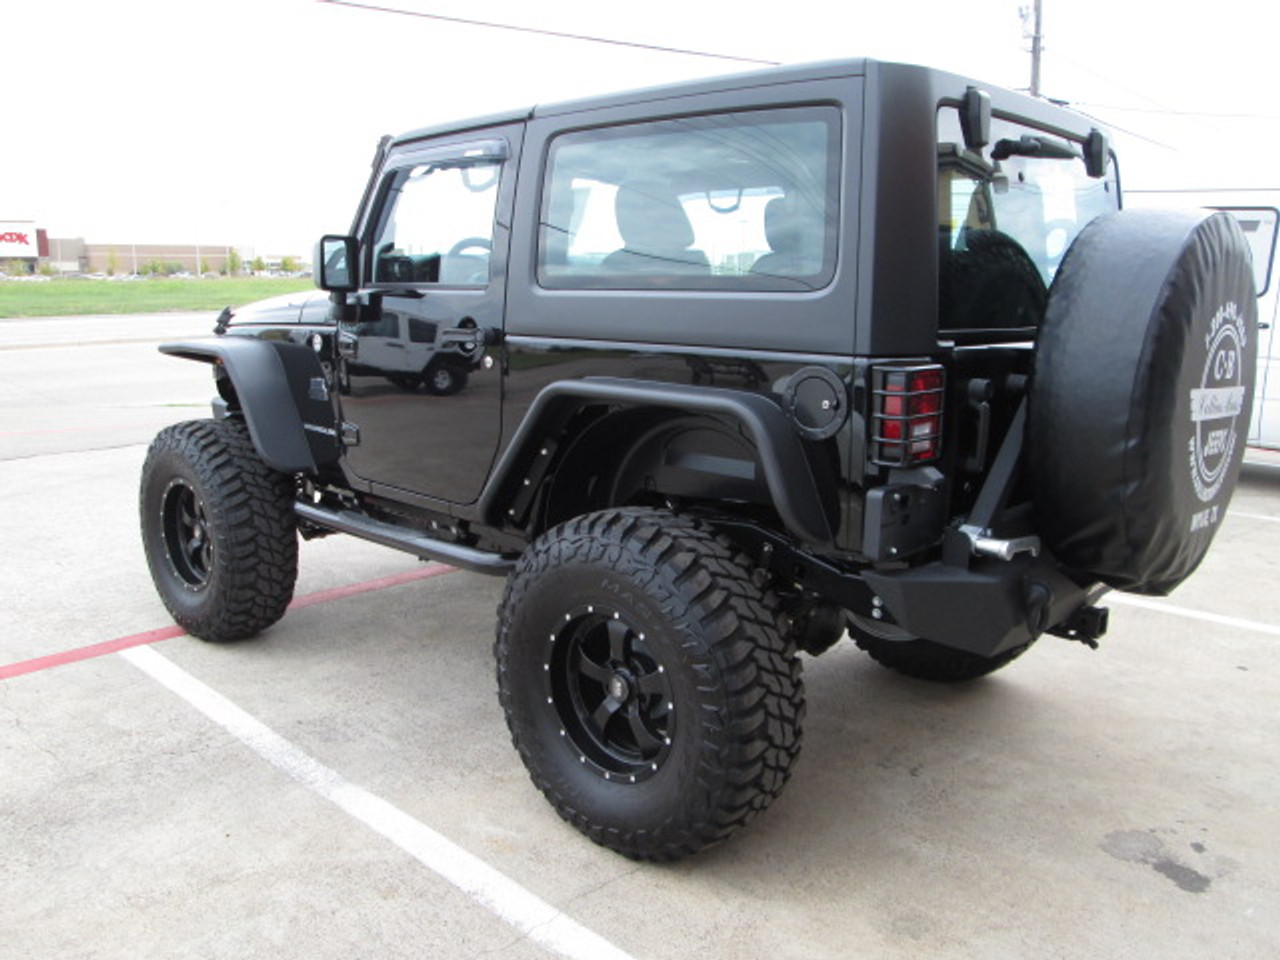 Sold 2015 Black Mountain Conversions 2DR Hard Top Jeep Wrangler Stock# 596129